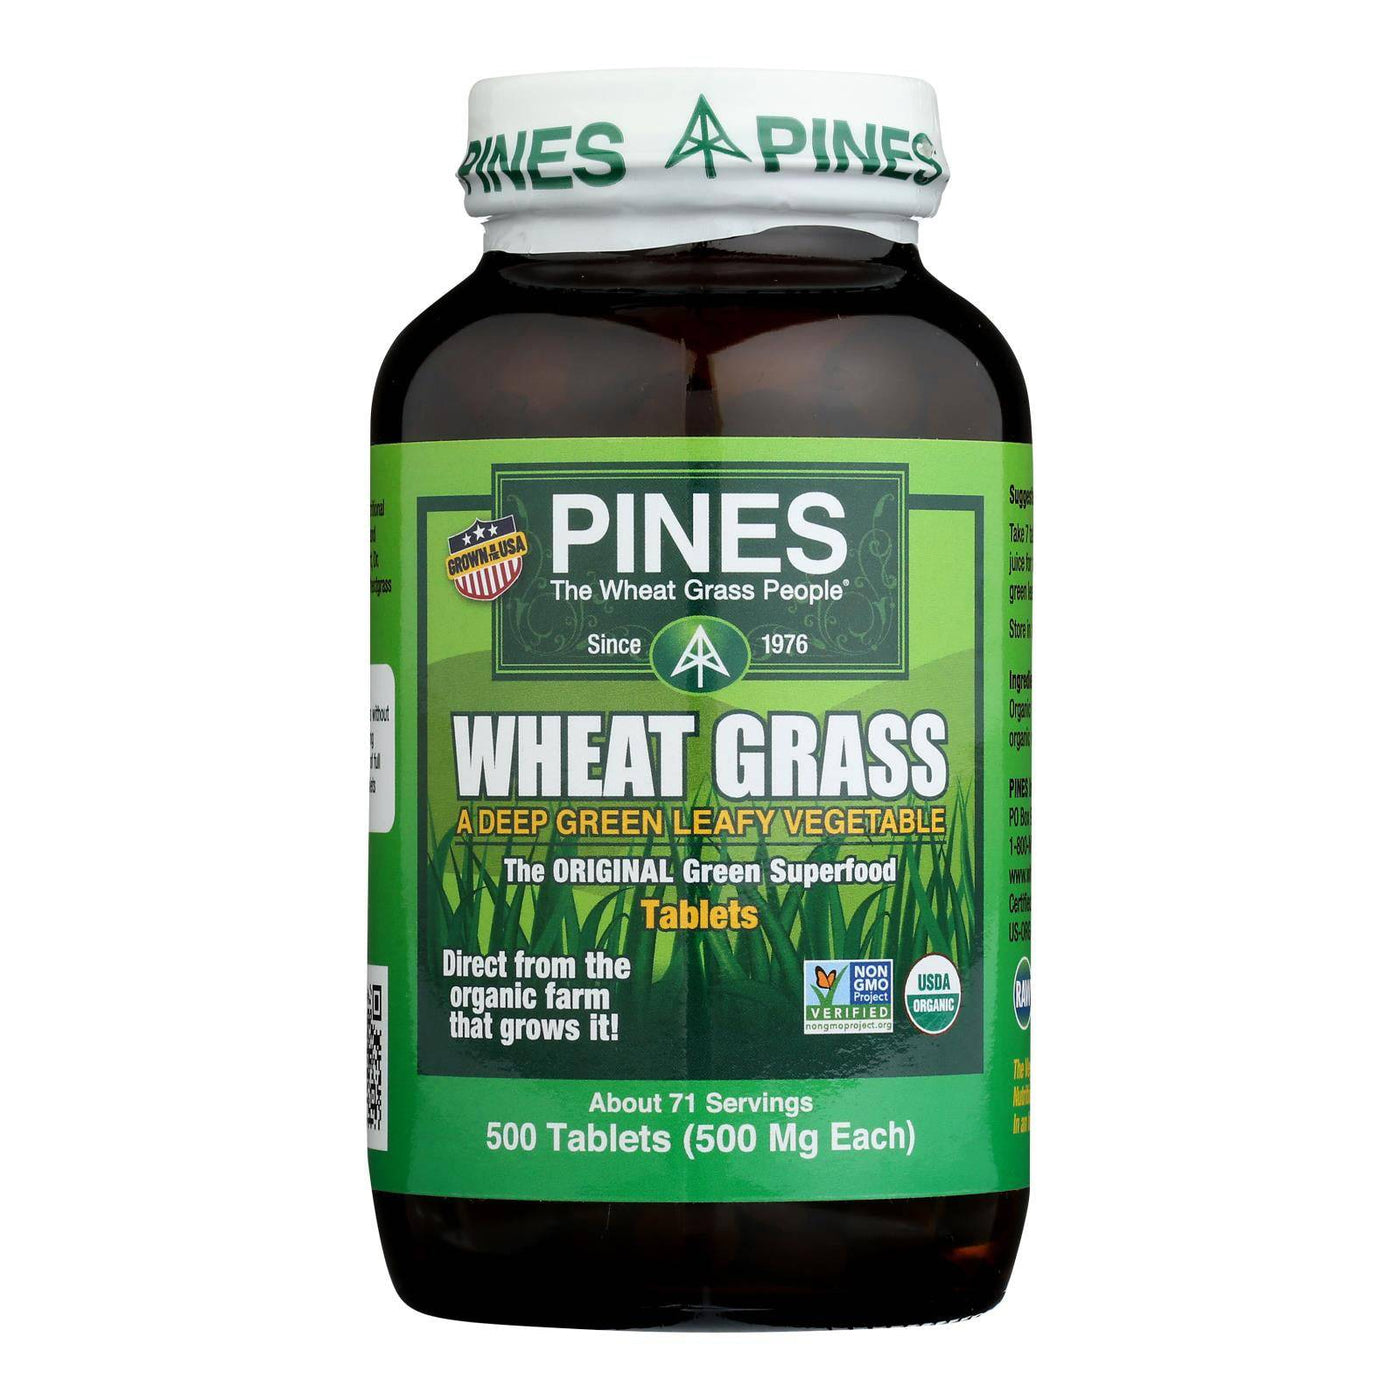 Pines International Wheat Grass - 500 Mg - 500 Tablets | OnlyNaturals.us